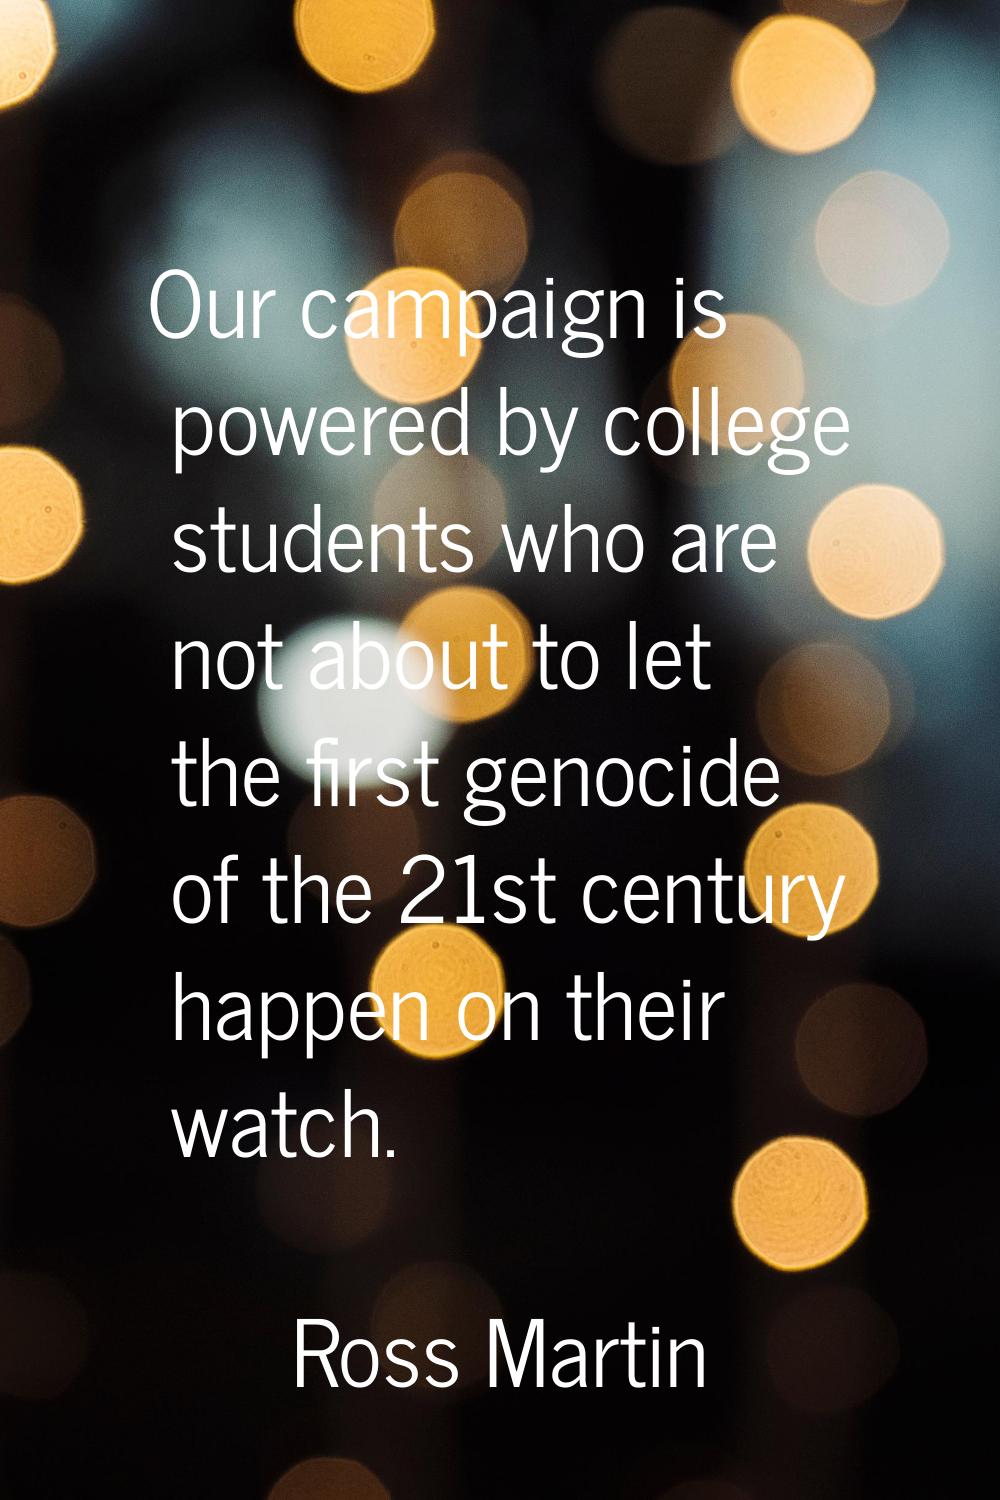 Our campaign is powered by college students who are not about to let the first genocide of the 21st